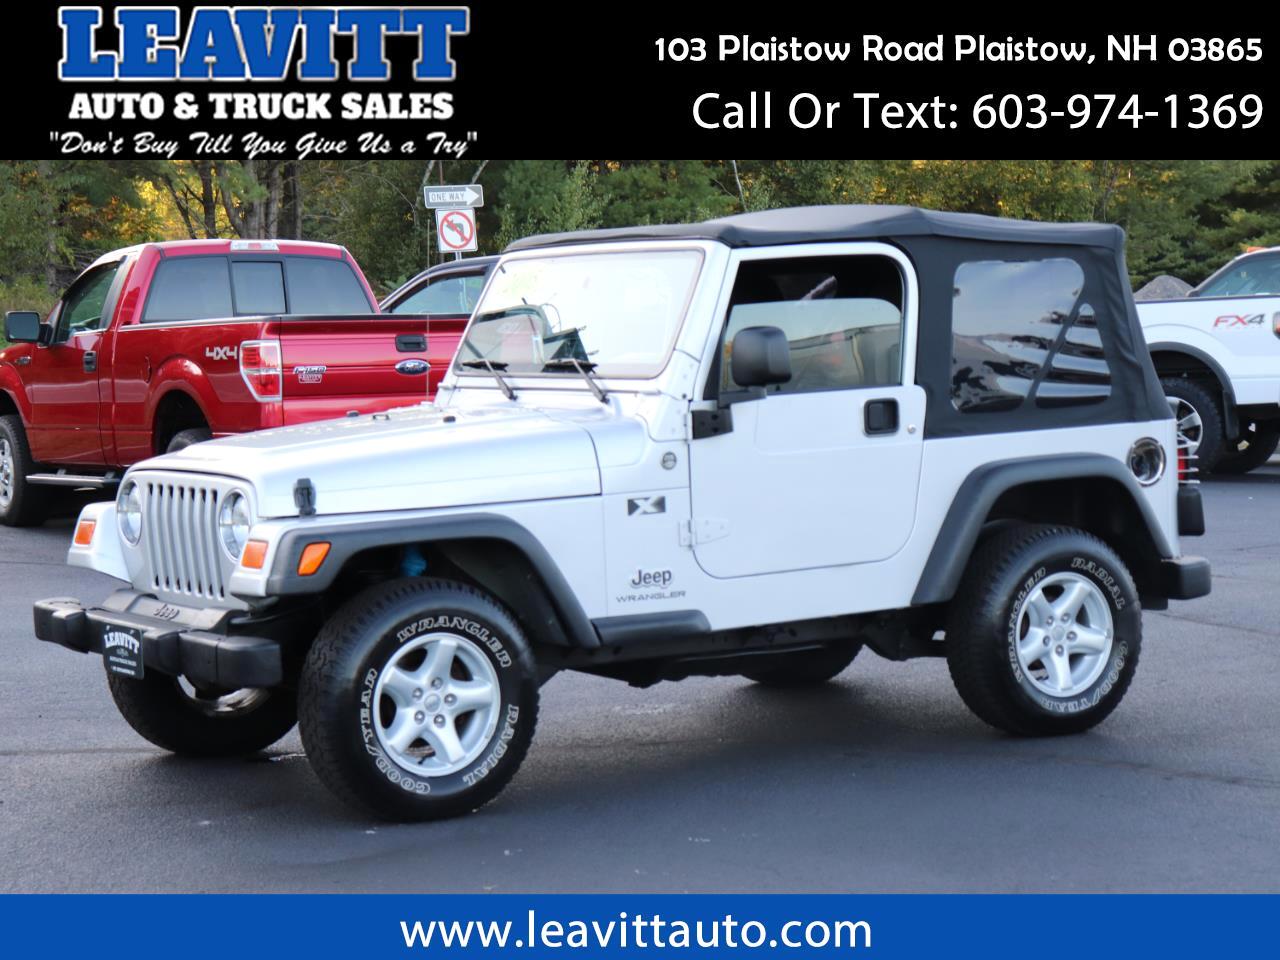 Used Cars For Sale Plaistow Nh 03865 Leavitt Auto And Truck